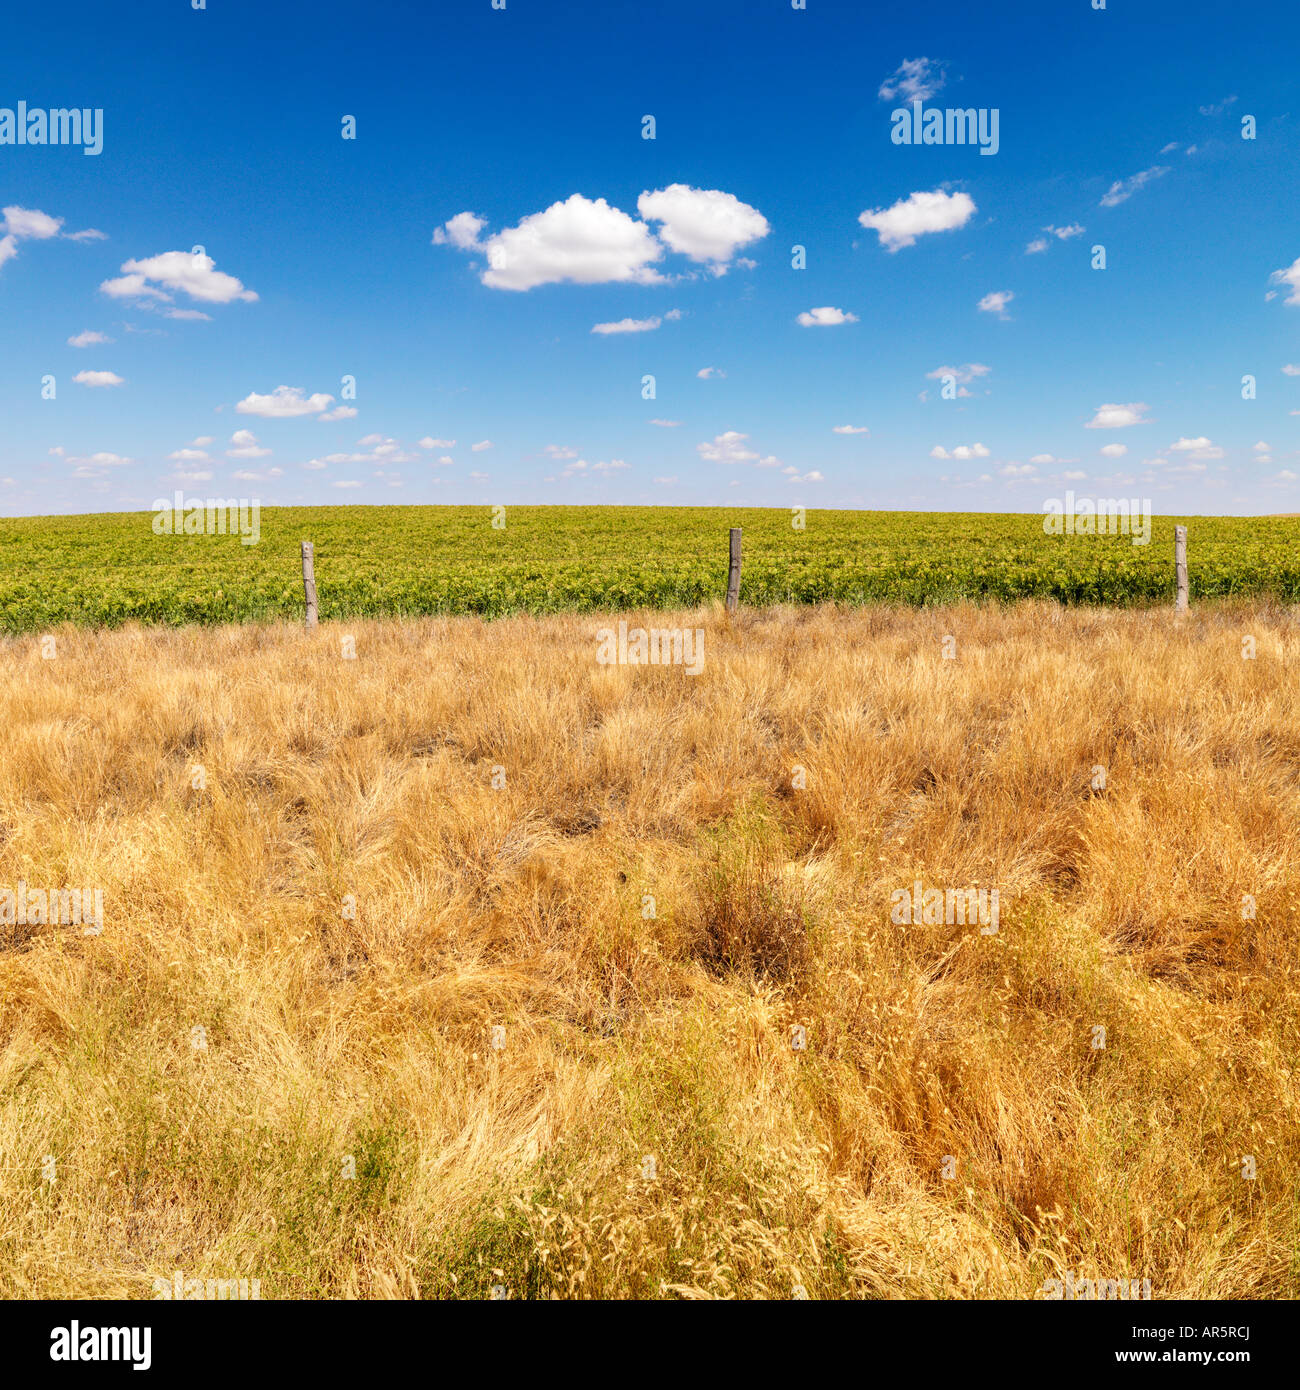 Rural field with agricultural crop and barbed wire fence Stock Photo